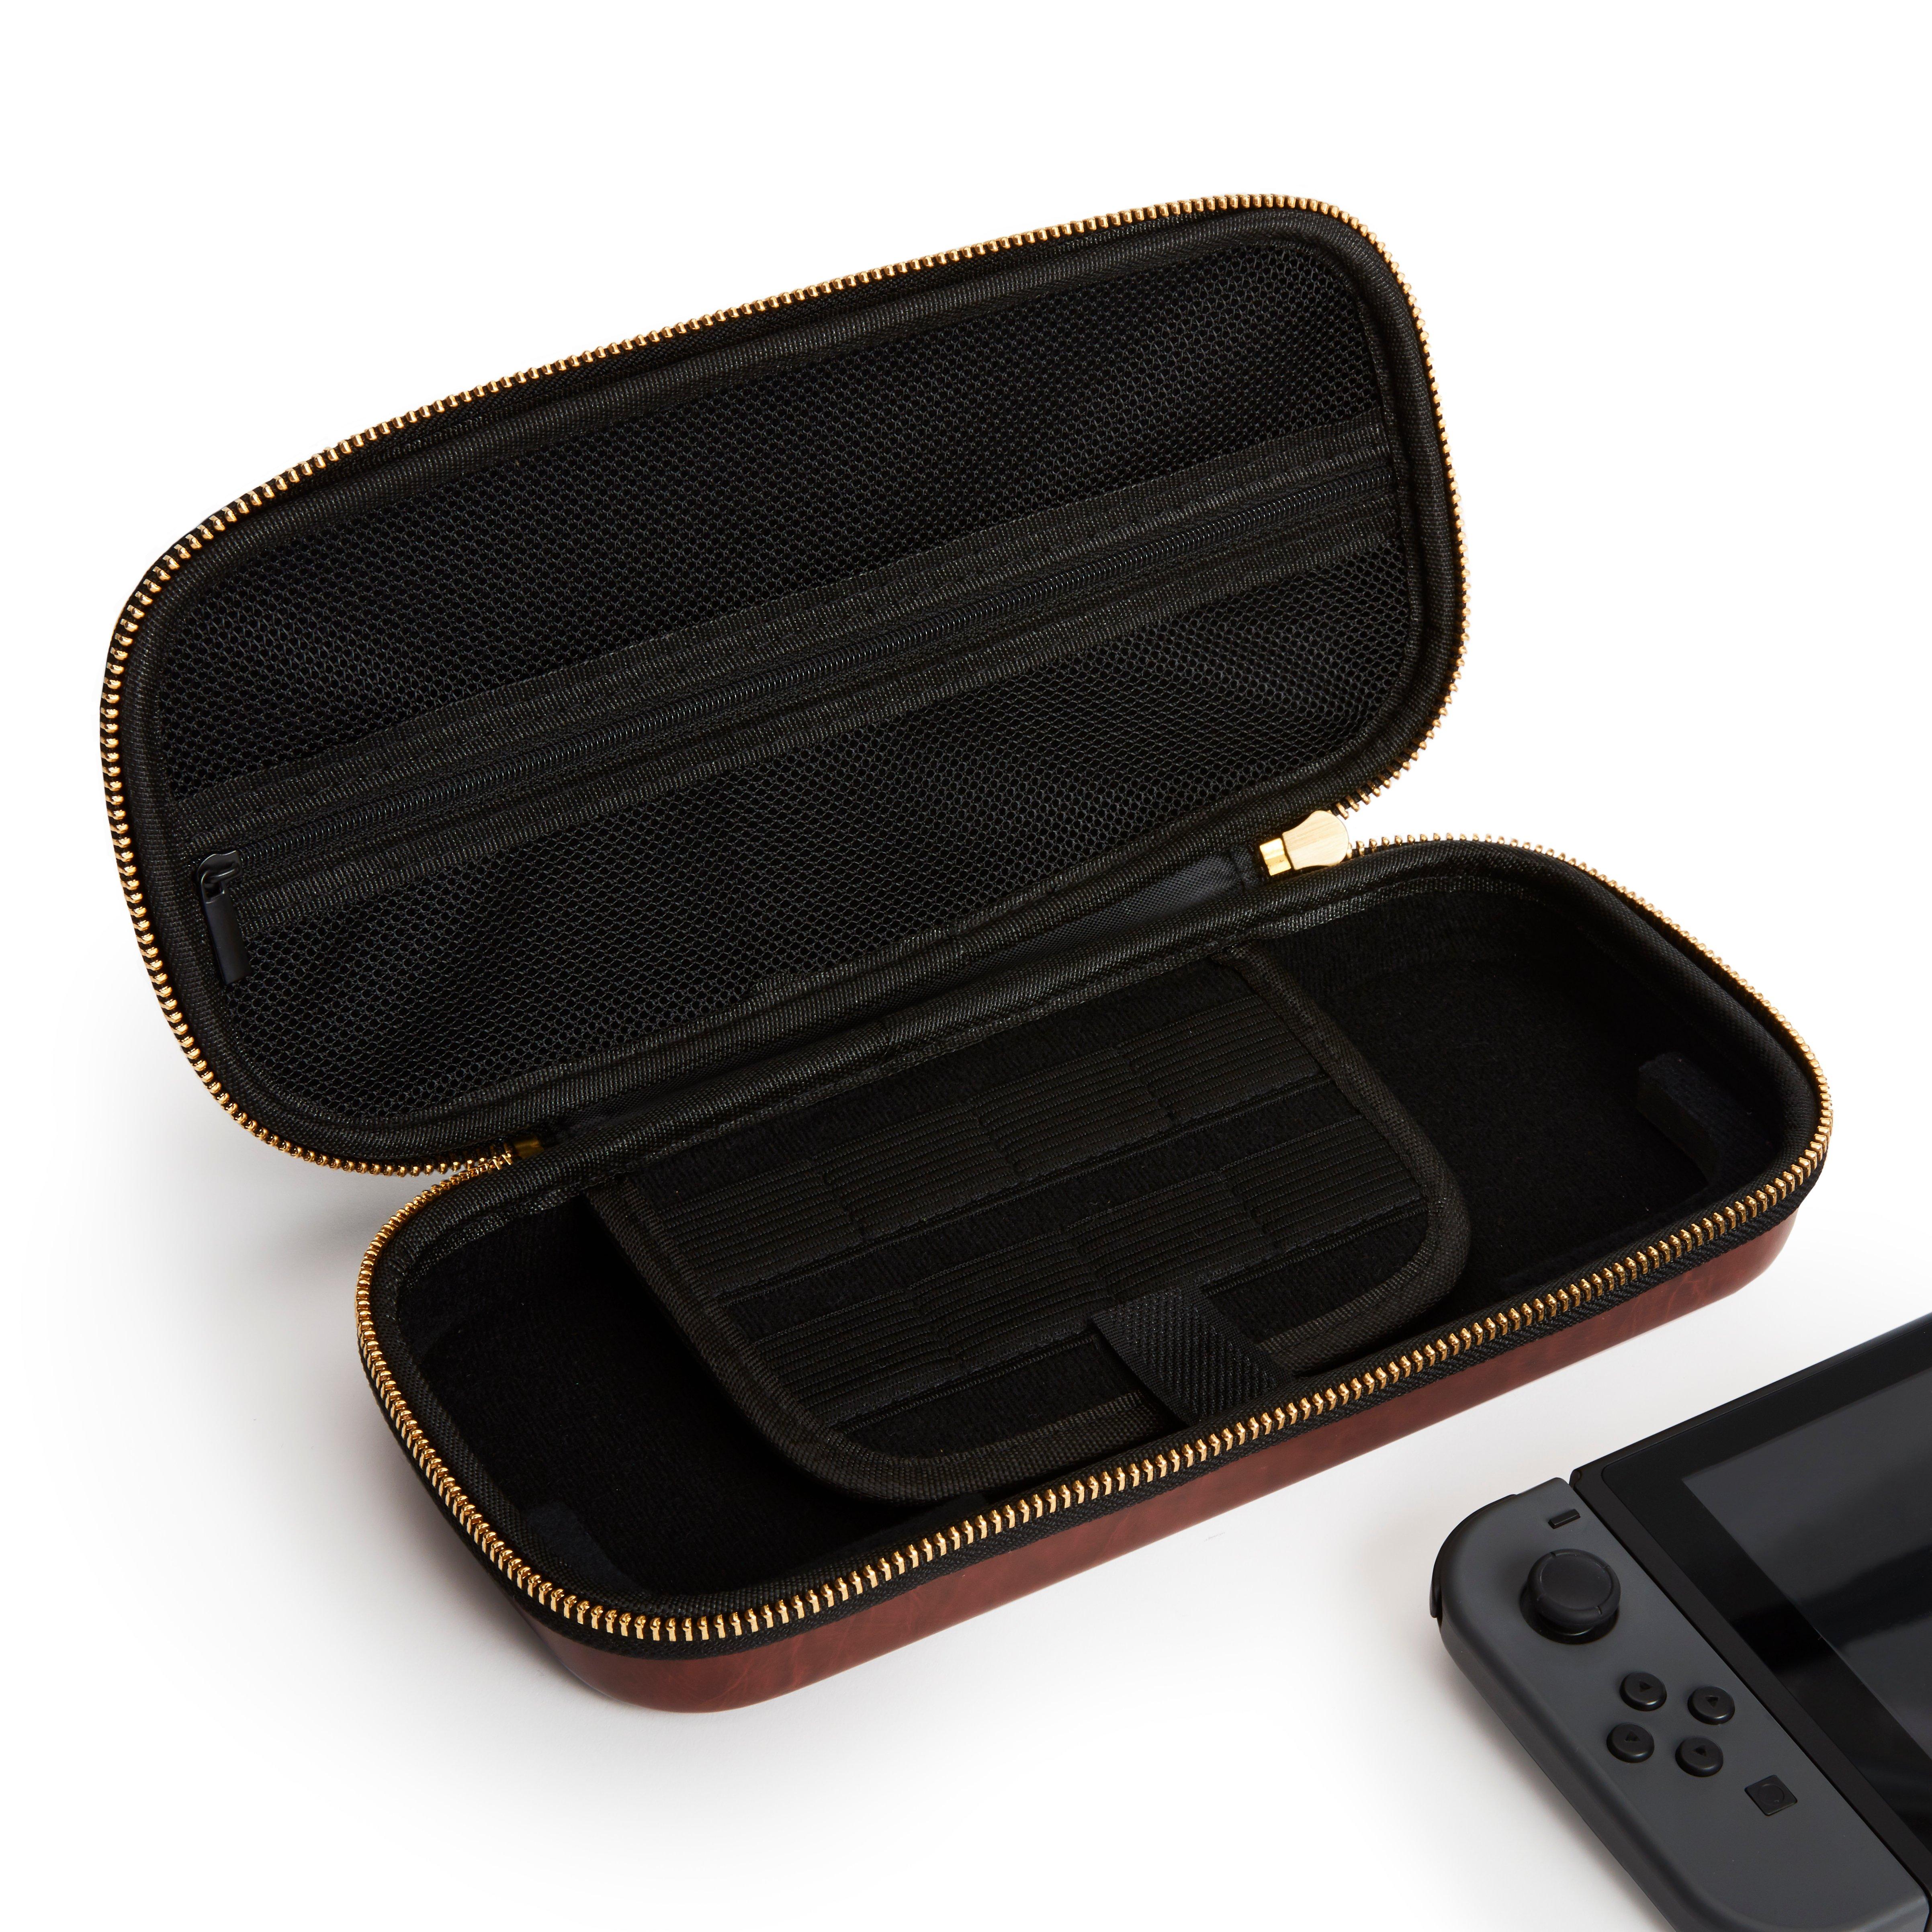 Nintendo Switch Carrying Case & Screen Protector - The Legend of